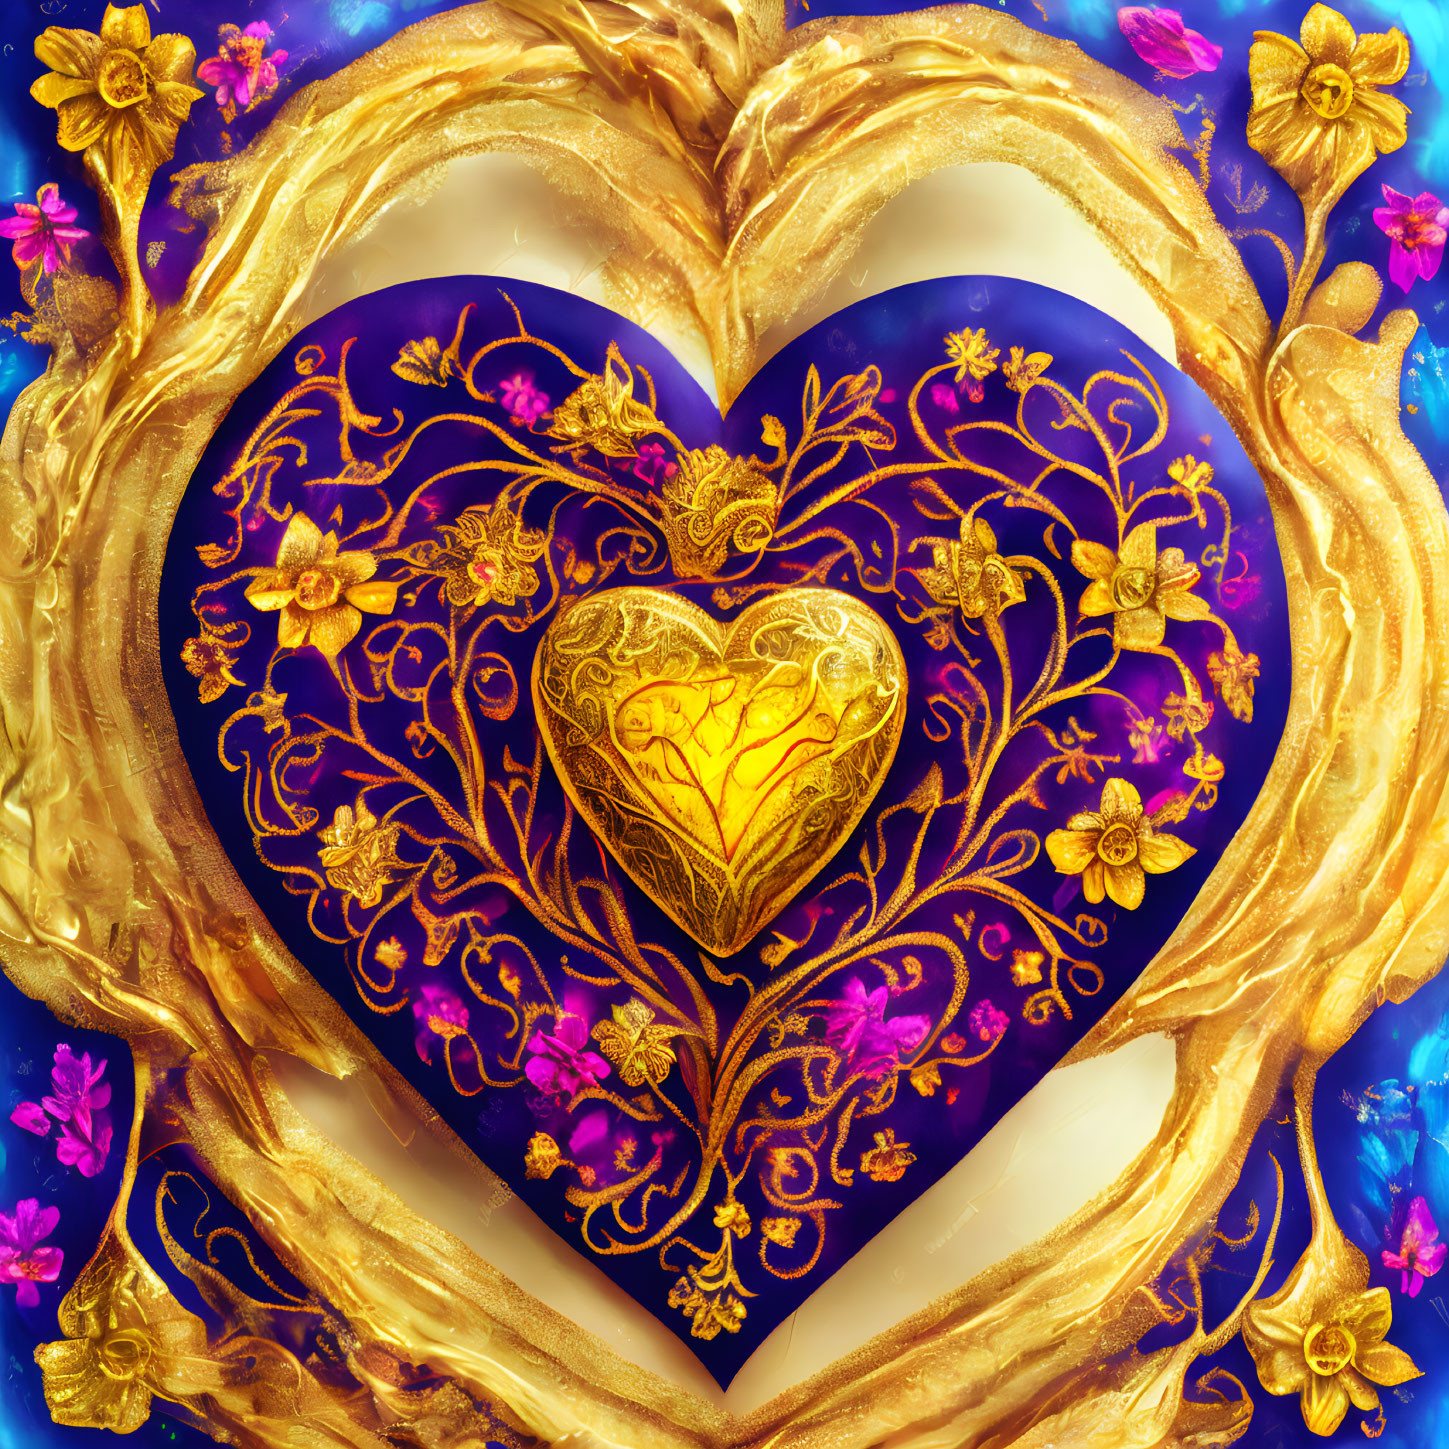 Intricate Floral Golden Heart on Blue Background